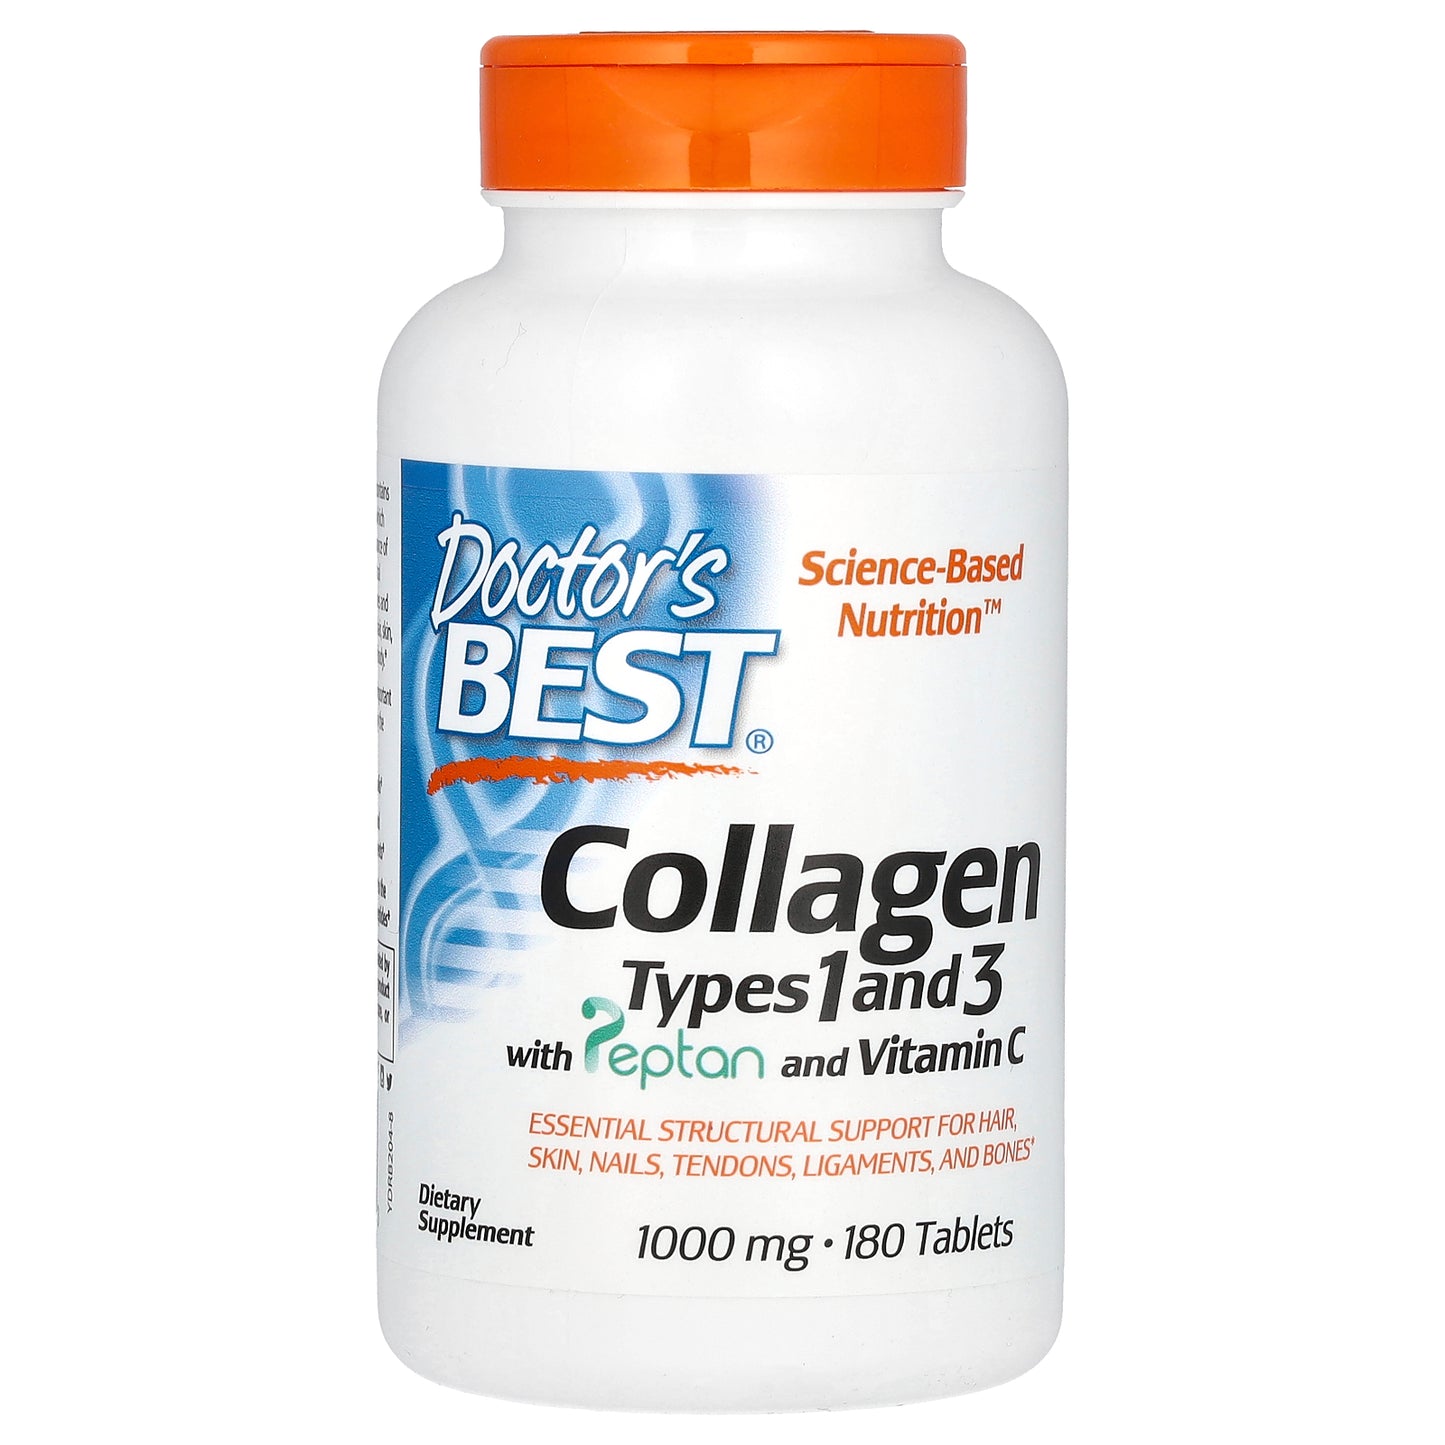 Doctor's Best Collagen Types 1 and 3 with Peptan and Vitamin C, 1,000 mg, 180 Tablets